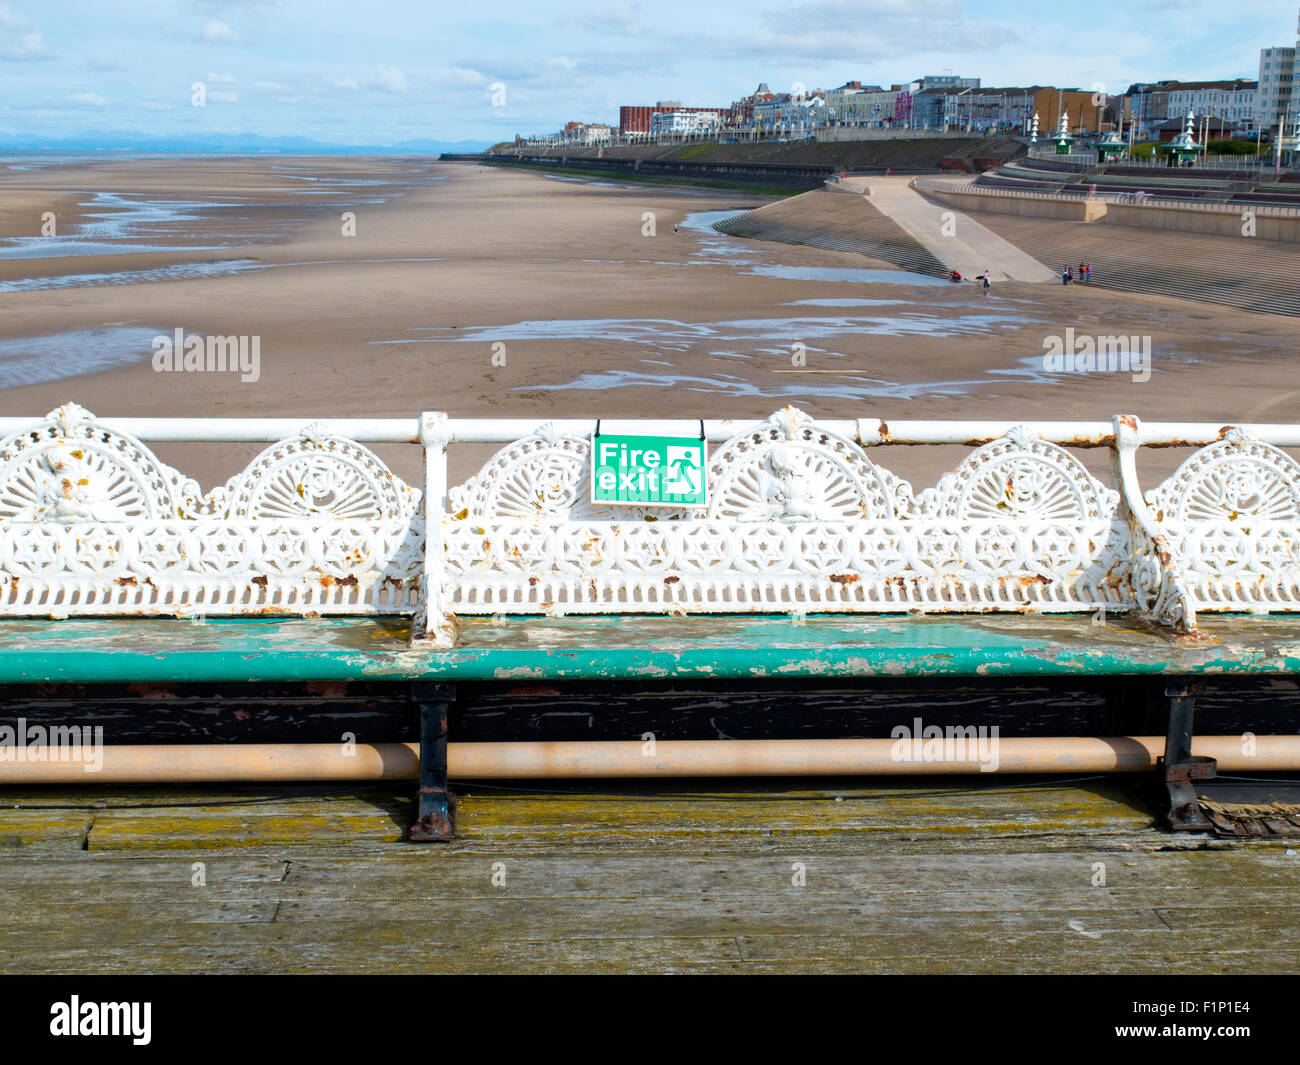 Amusing sign Central pier Blackpool Stock Photo